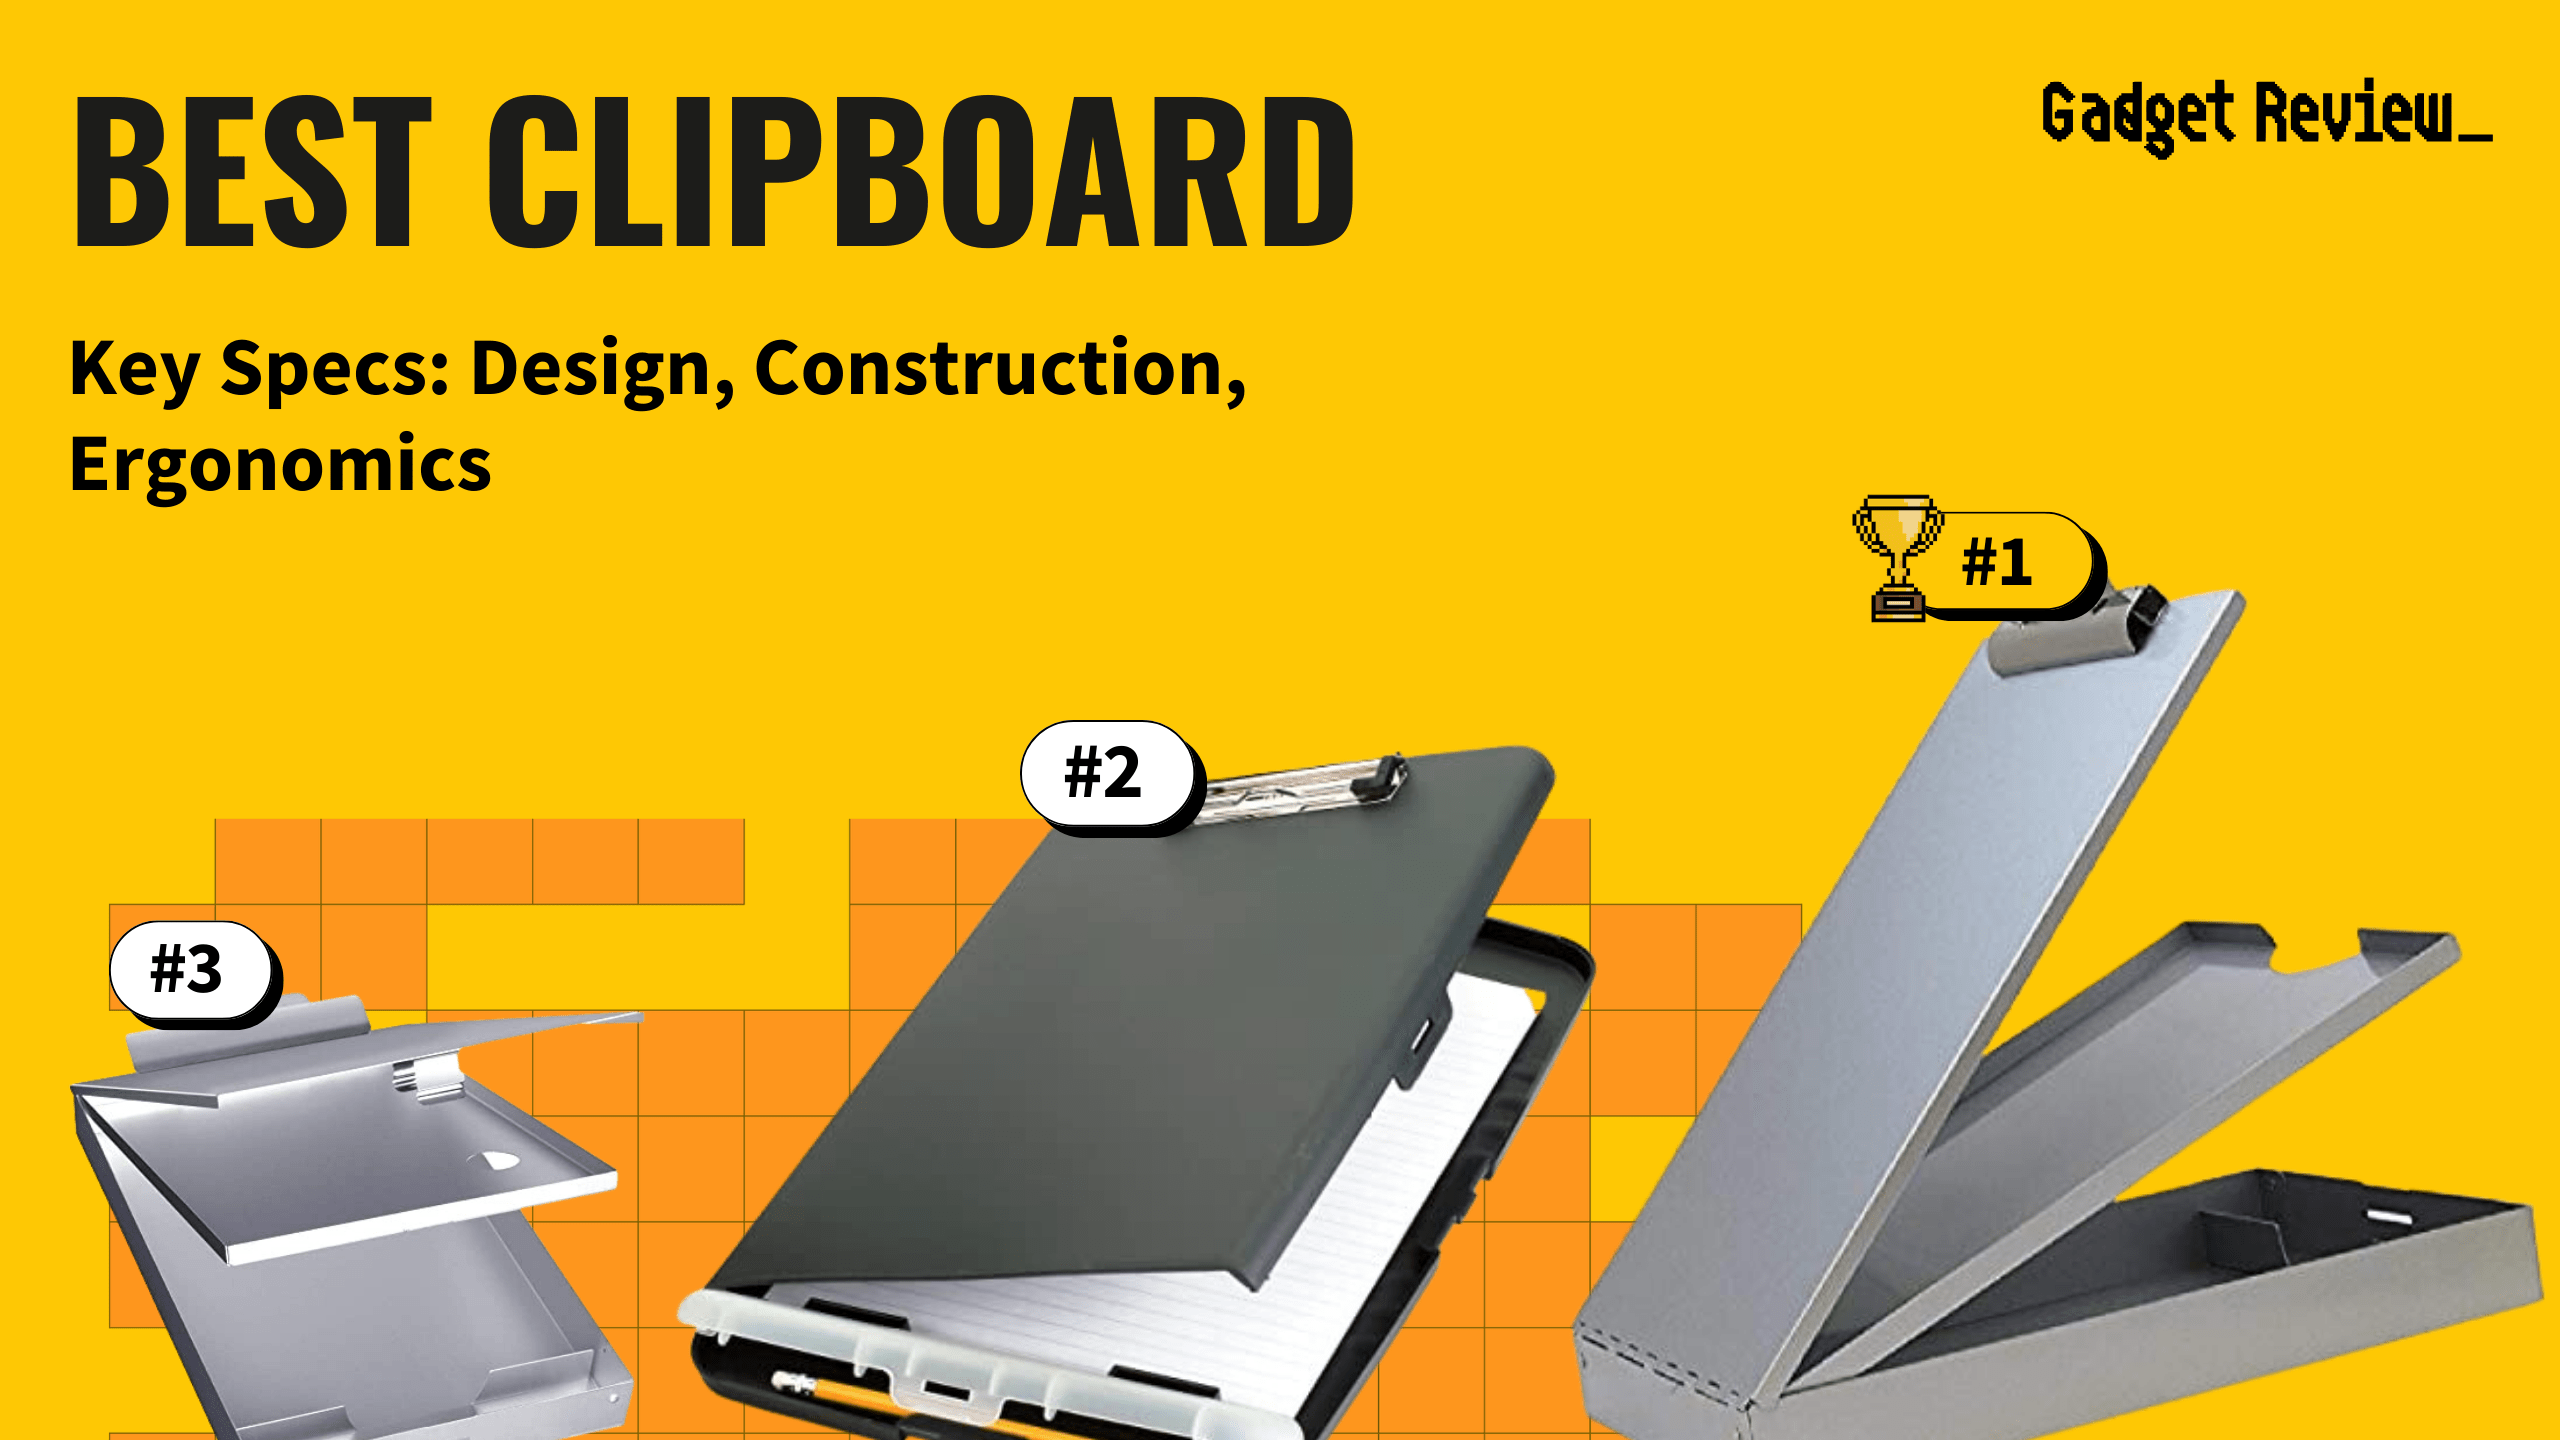 best clipboard featured image that shows the top three best office product models